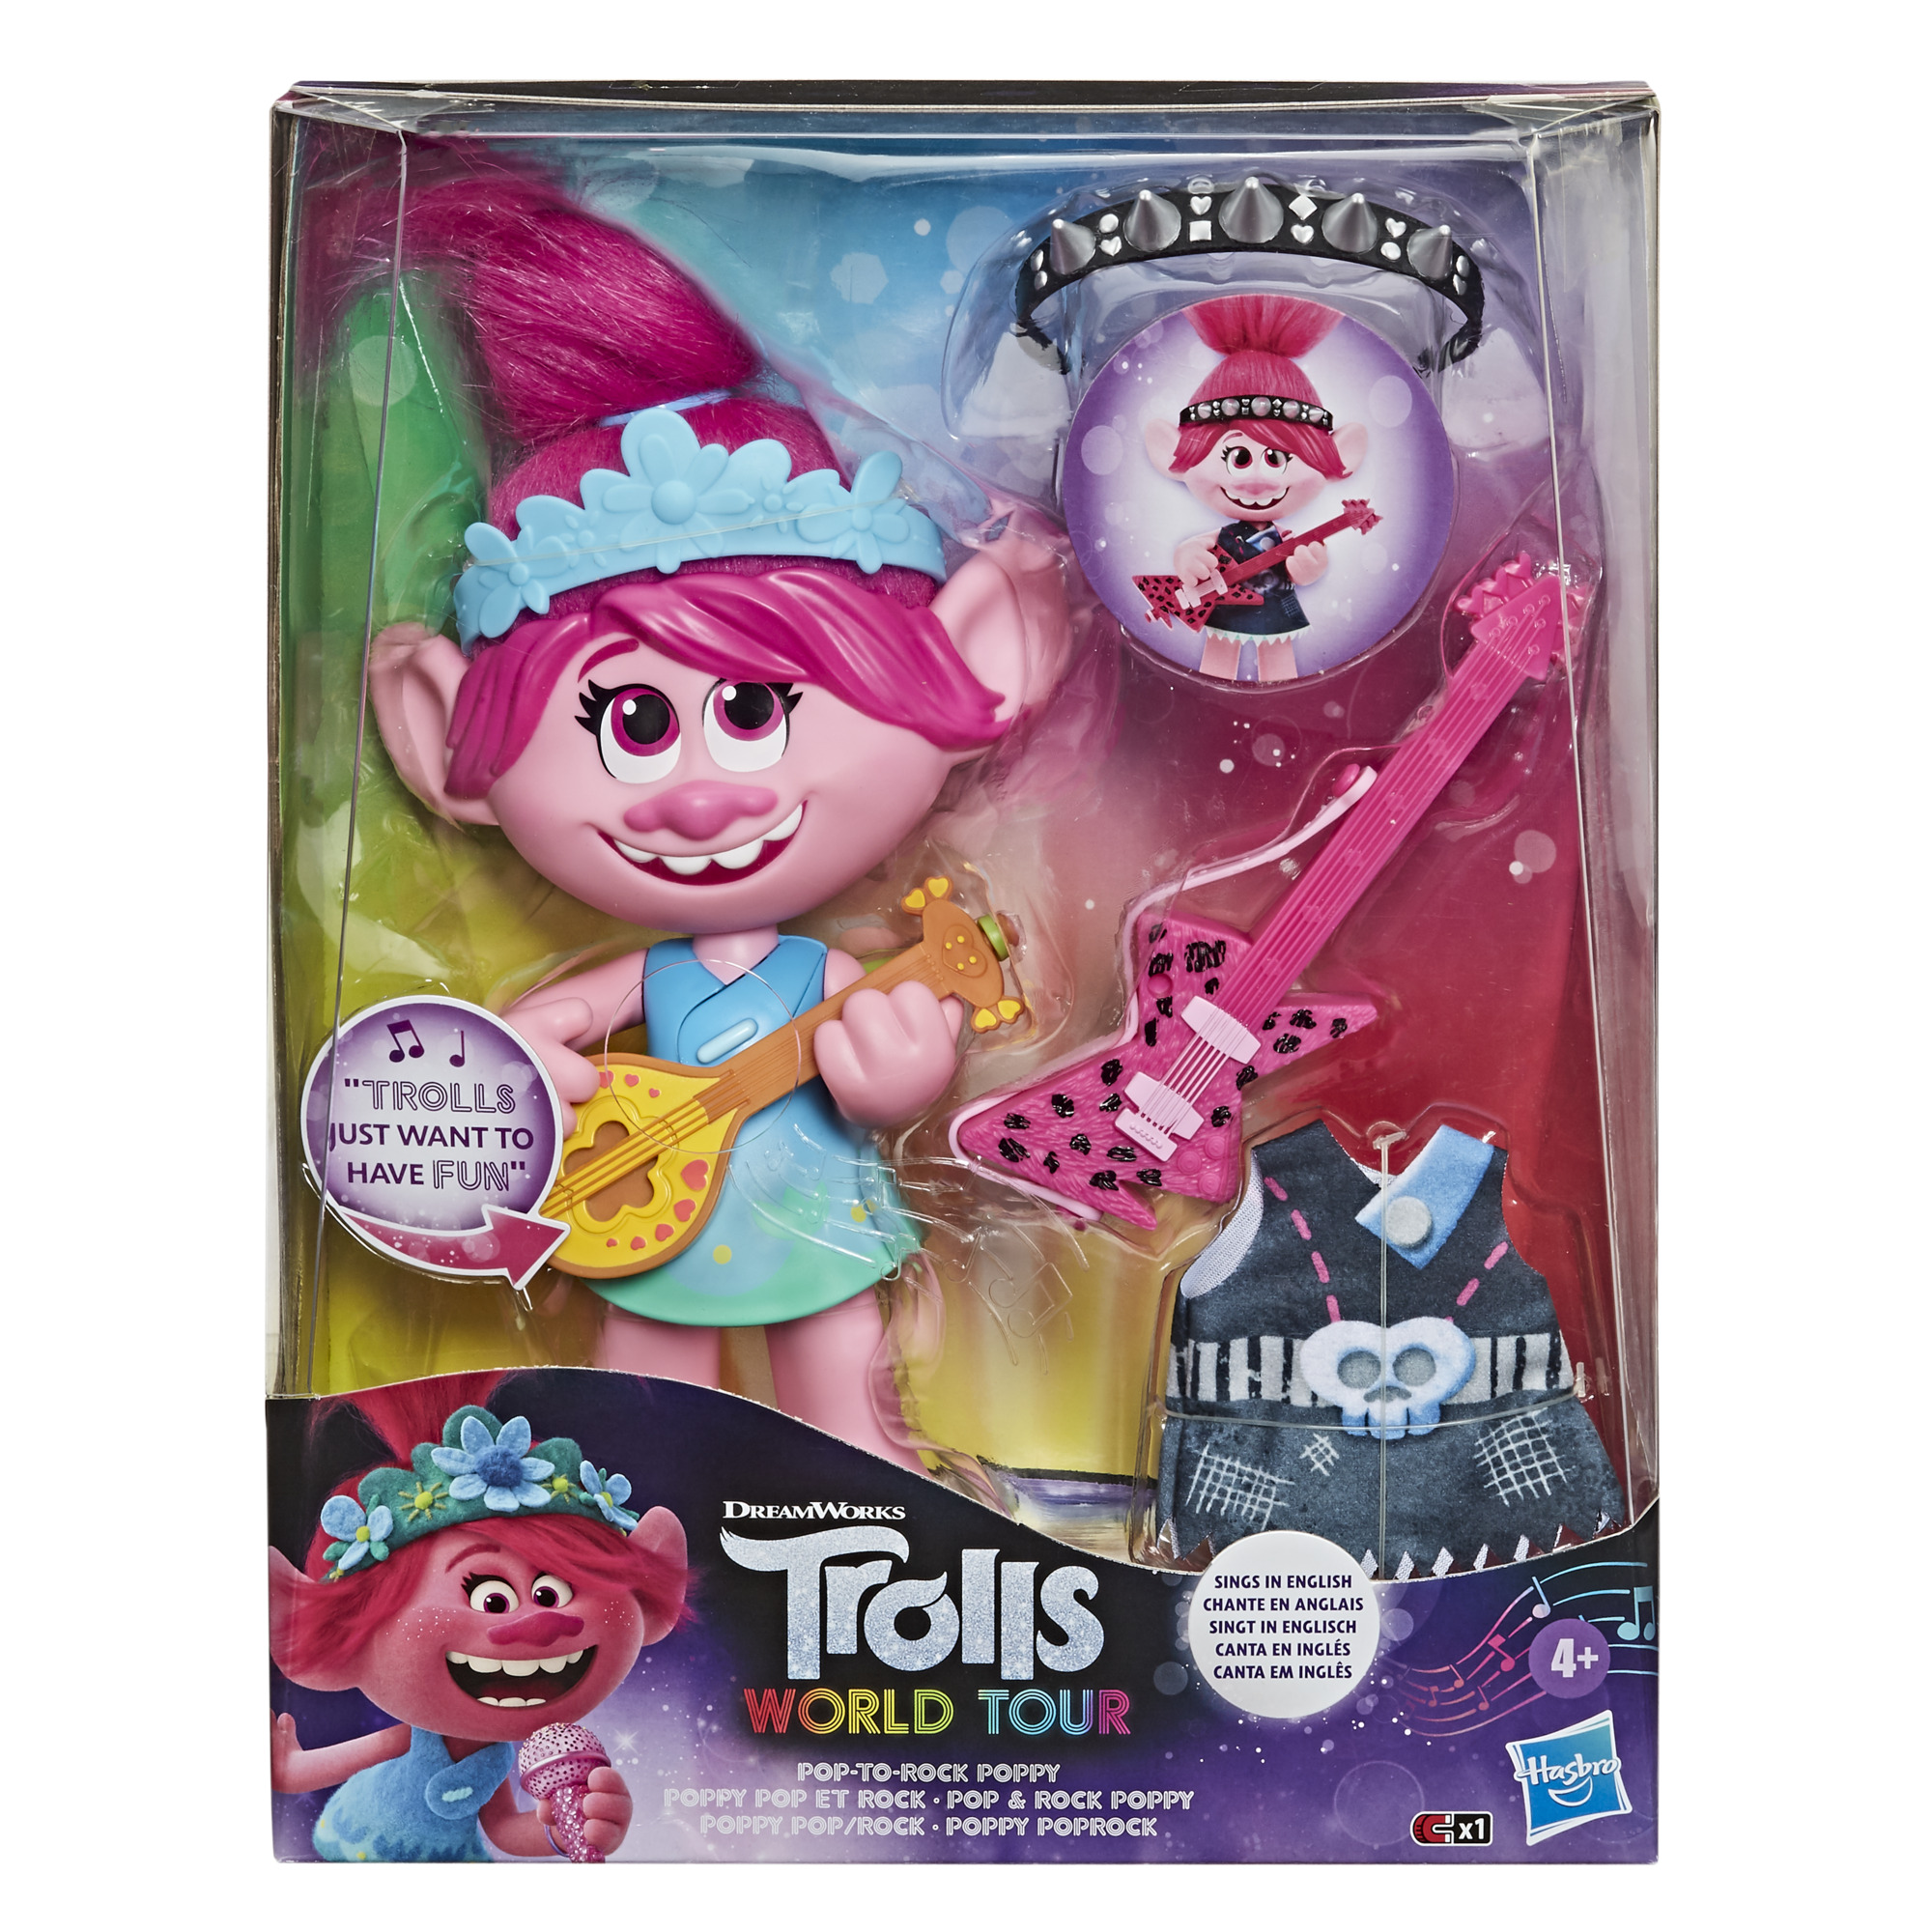 Dreamworks Trolls World Tour Pop-to-Rock Poppy, for Kids Ages 4 and up - image 4 of 8